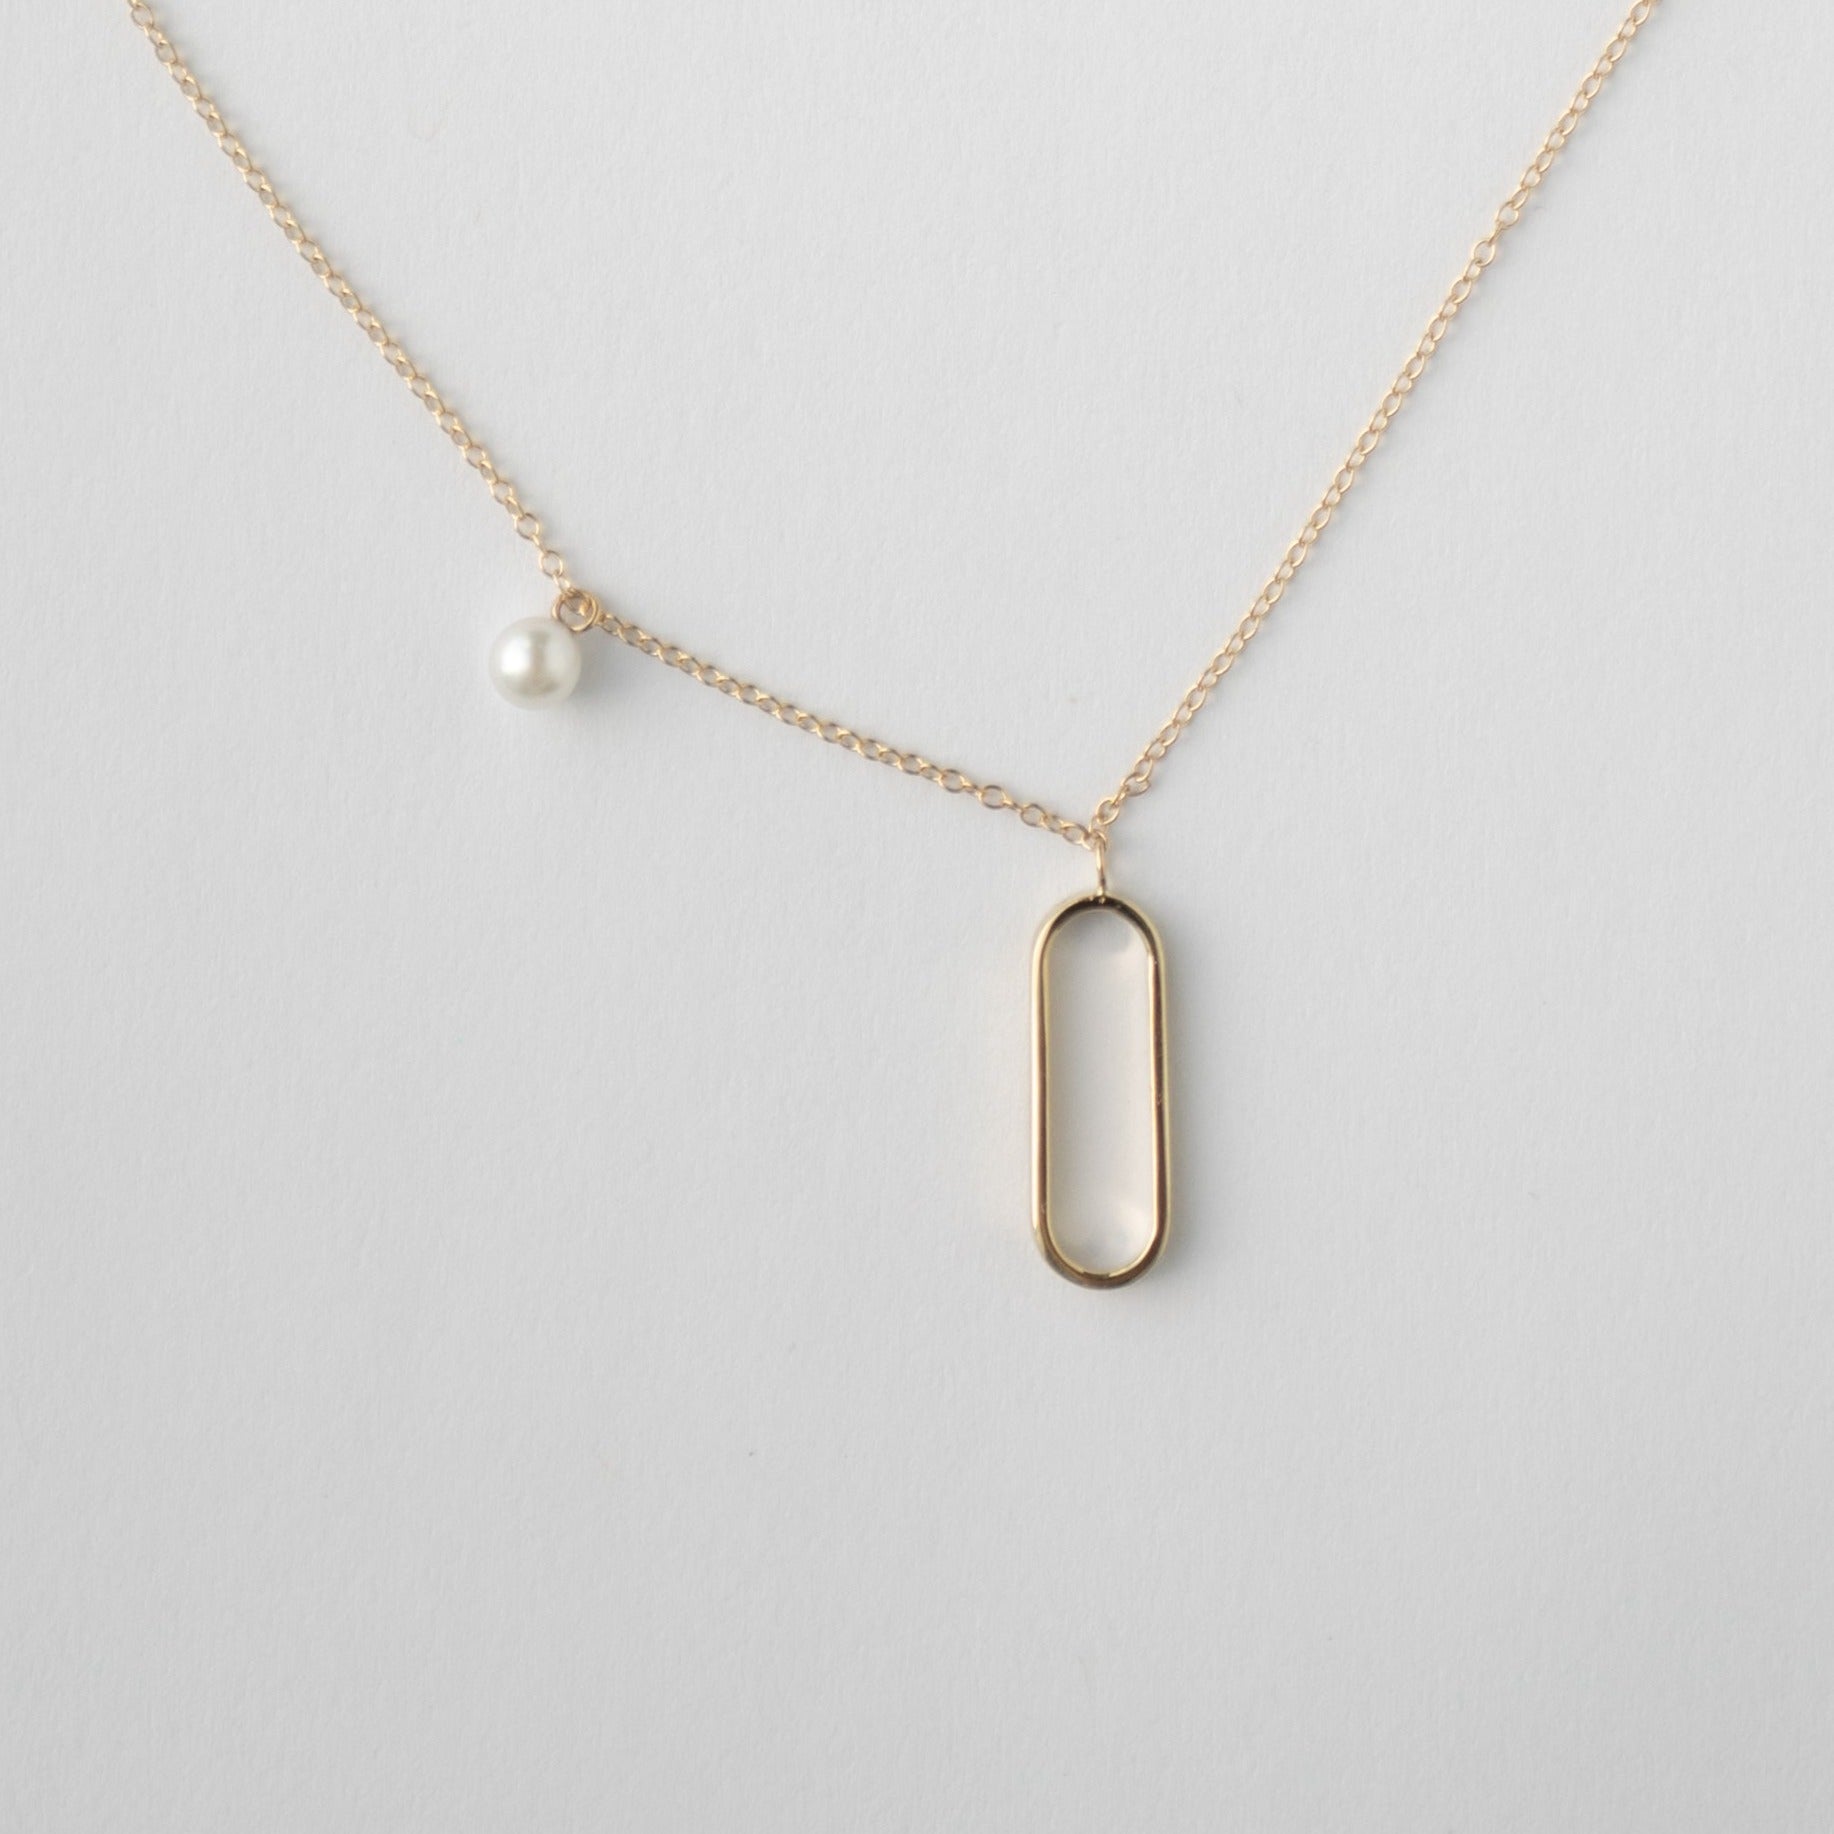 Rengi delicate necklace in 14k yellow gold with pearls made in NYC by SHW fine Jewelry